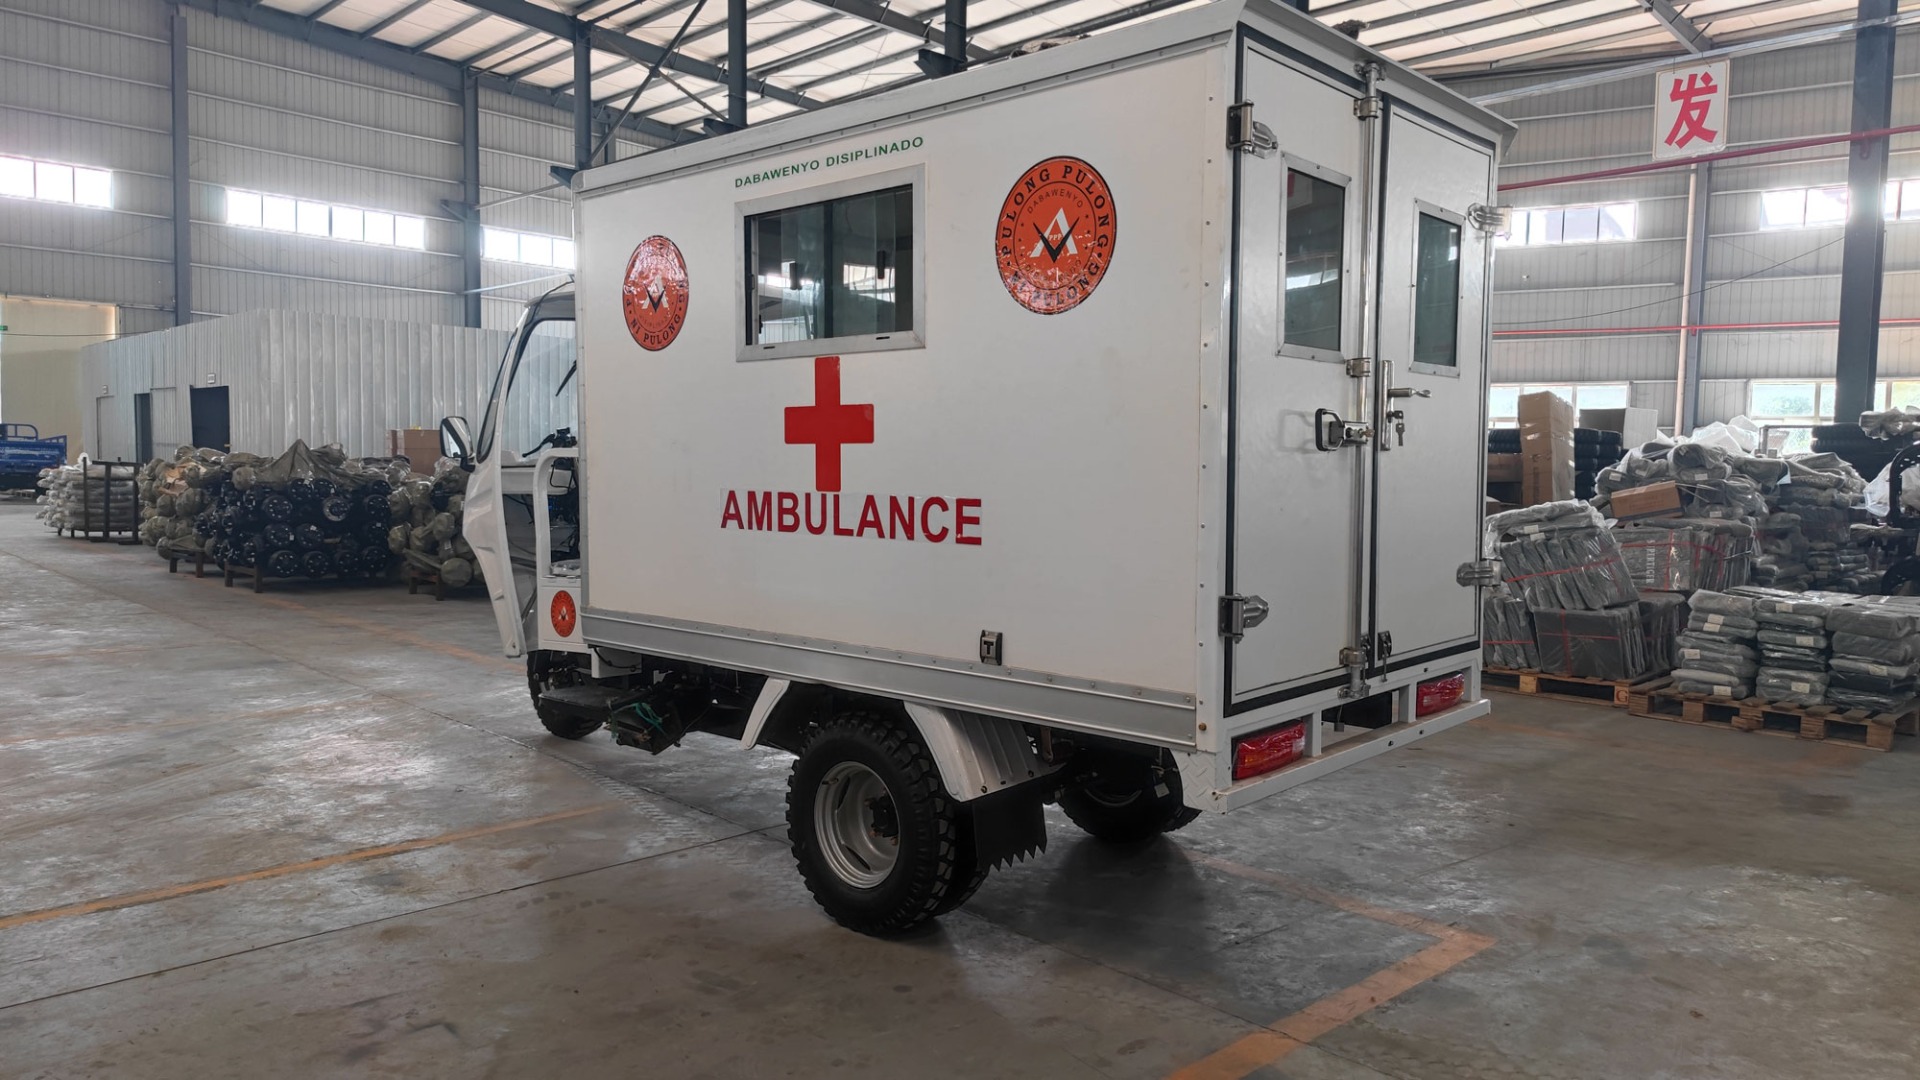 DY-JH1 DAYANG White Ambulance Car Price Reverse Trike Motorcycles / Adult Electric Tricycle For Sales